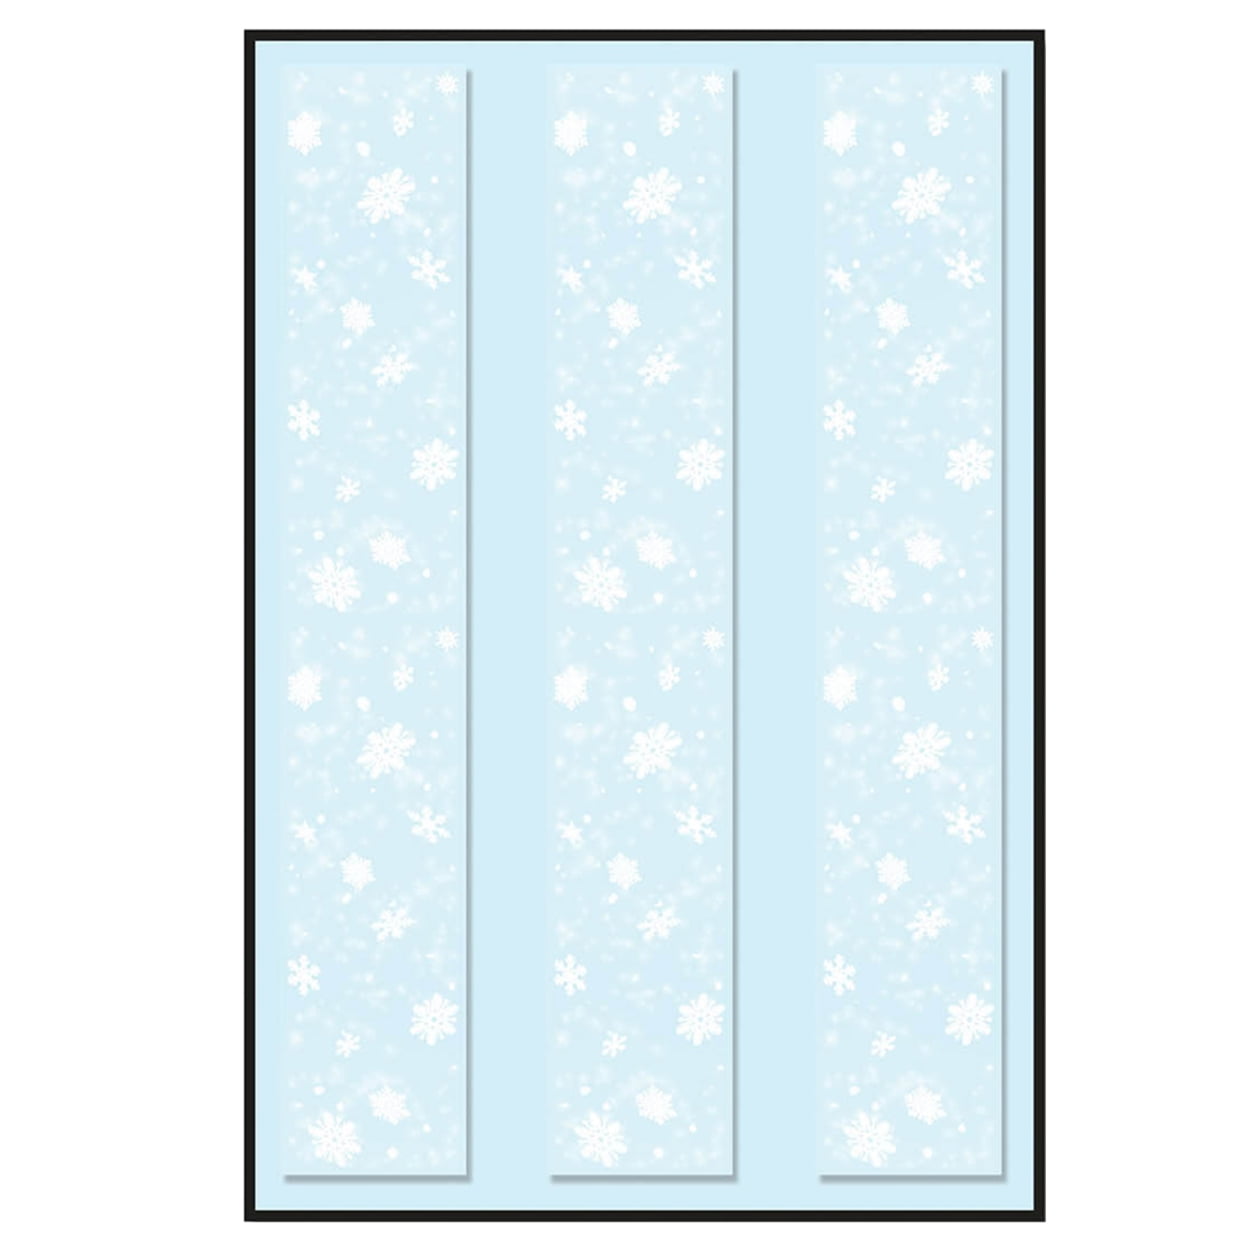 UPC 034689071891 product image for DDI 2181694 Snowflake Party Panels Case of 12 | upcitemdb.com